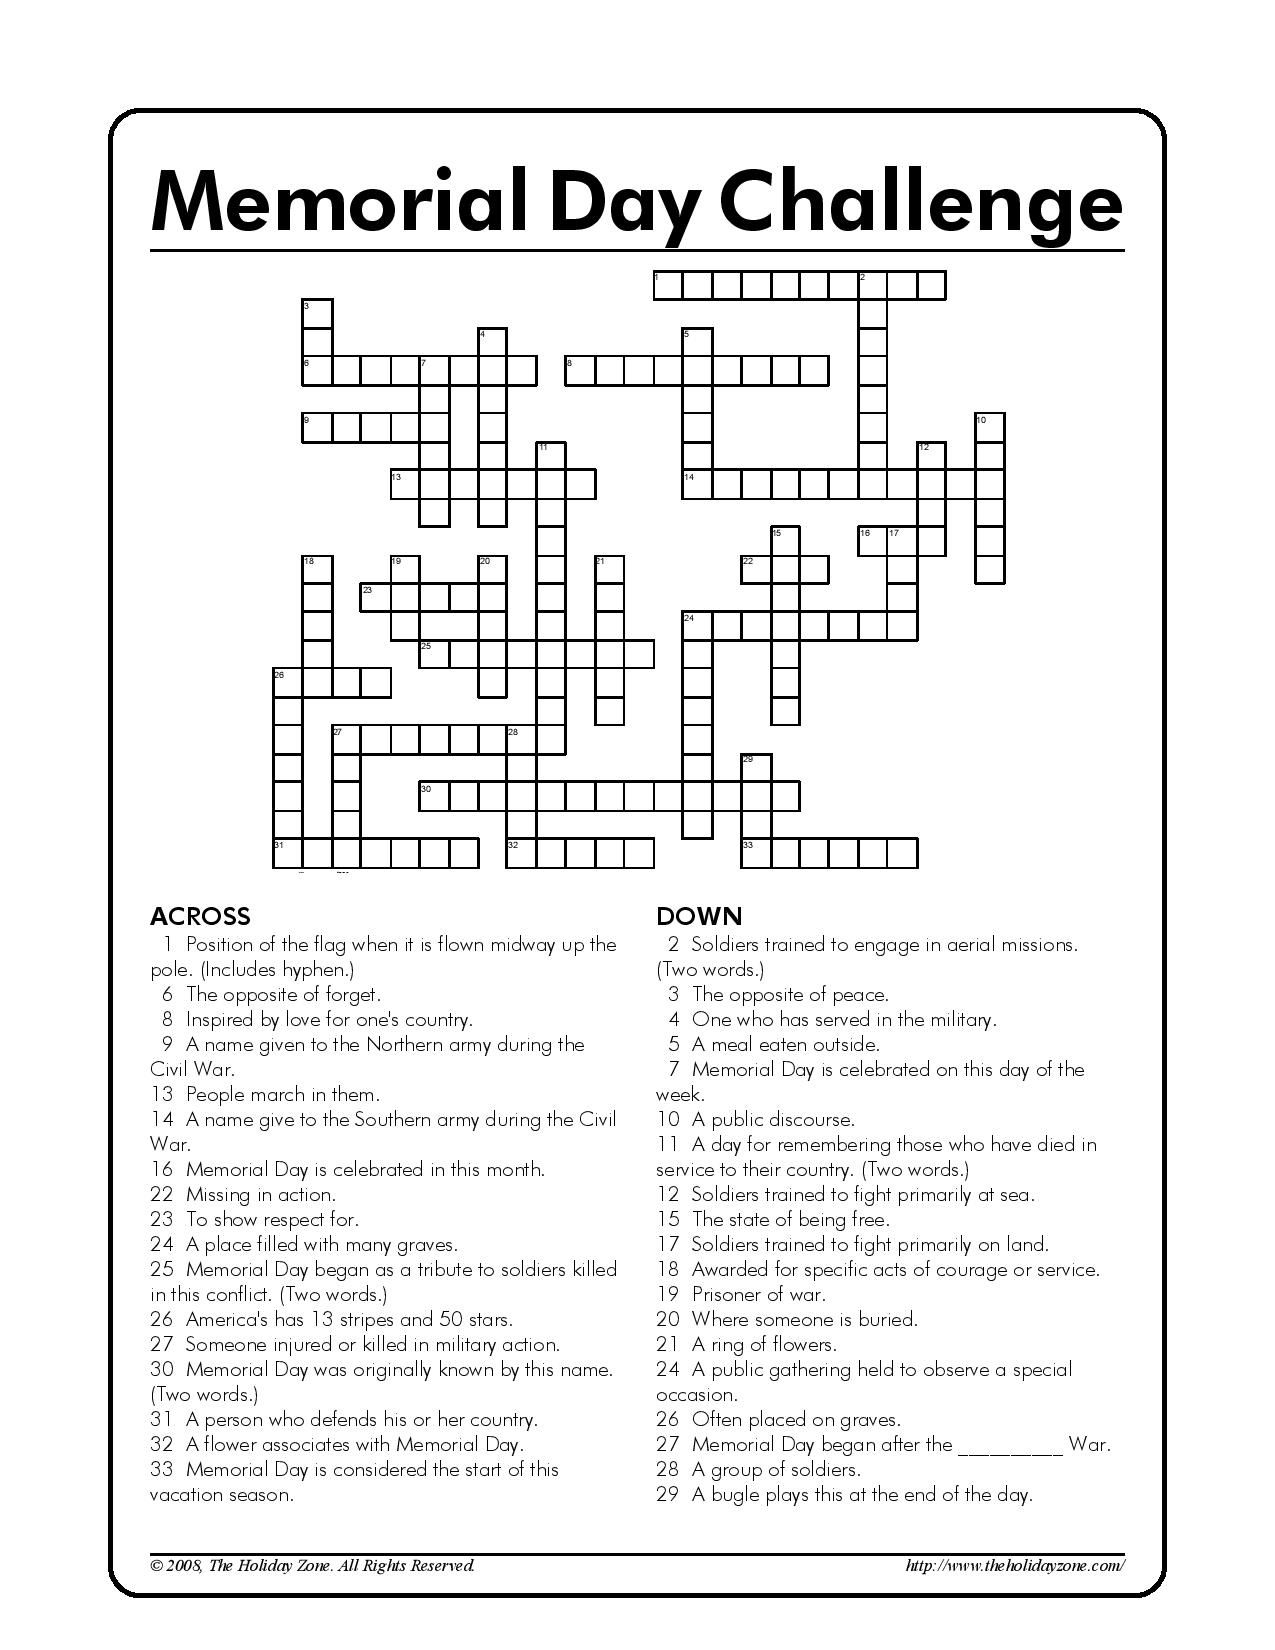 Memorial Day Kids Crossword Puzzle Courtesy Of The Holiday Zone